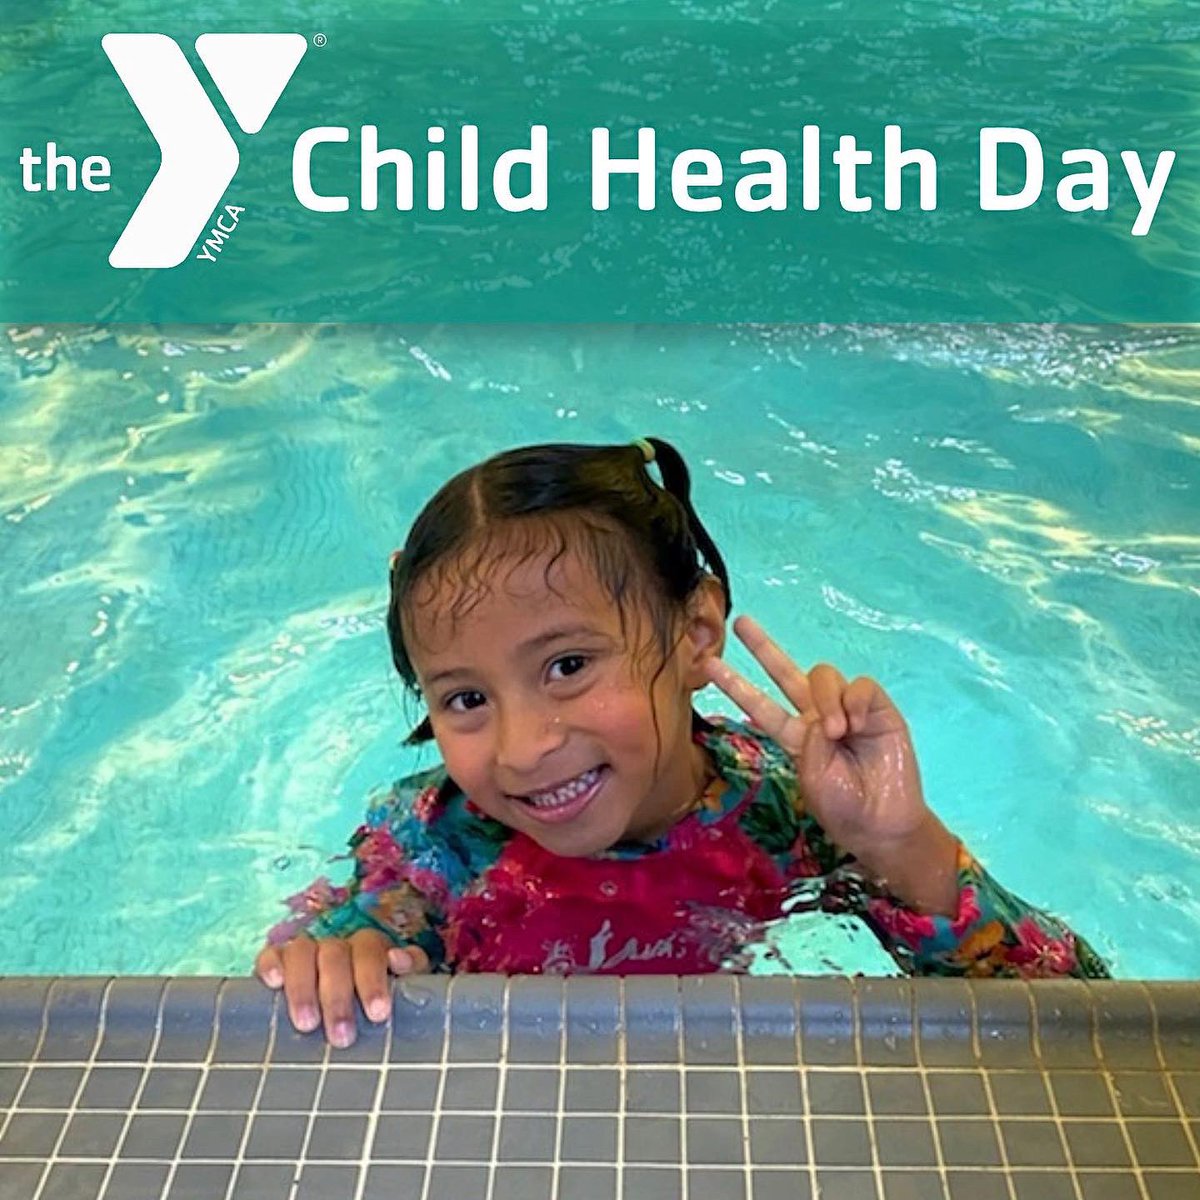 Happy National #ChildHealthDay ! A great reminder to keep our children happy, healthy, and active! How are you celebrating Child Health Day today? 🏊‍♀️